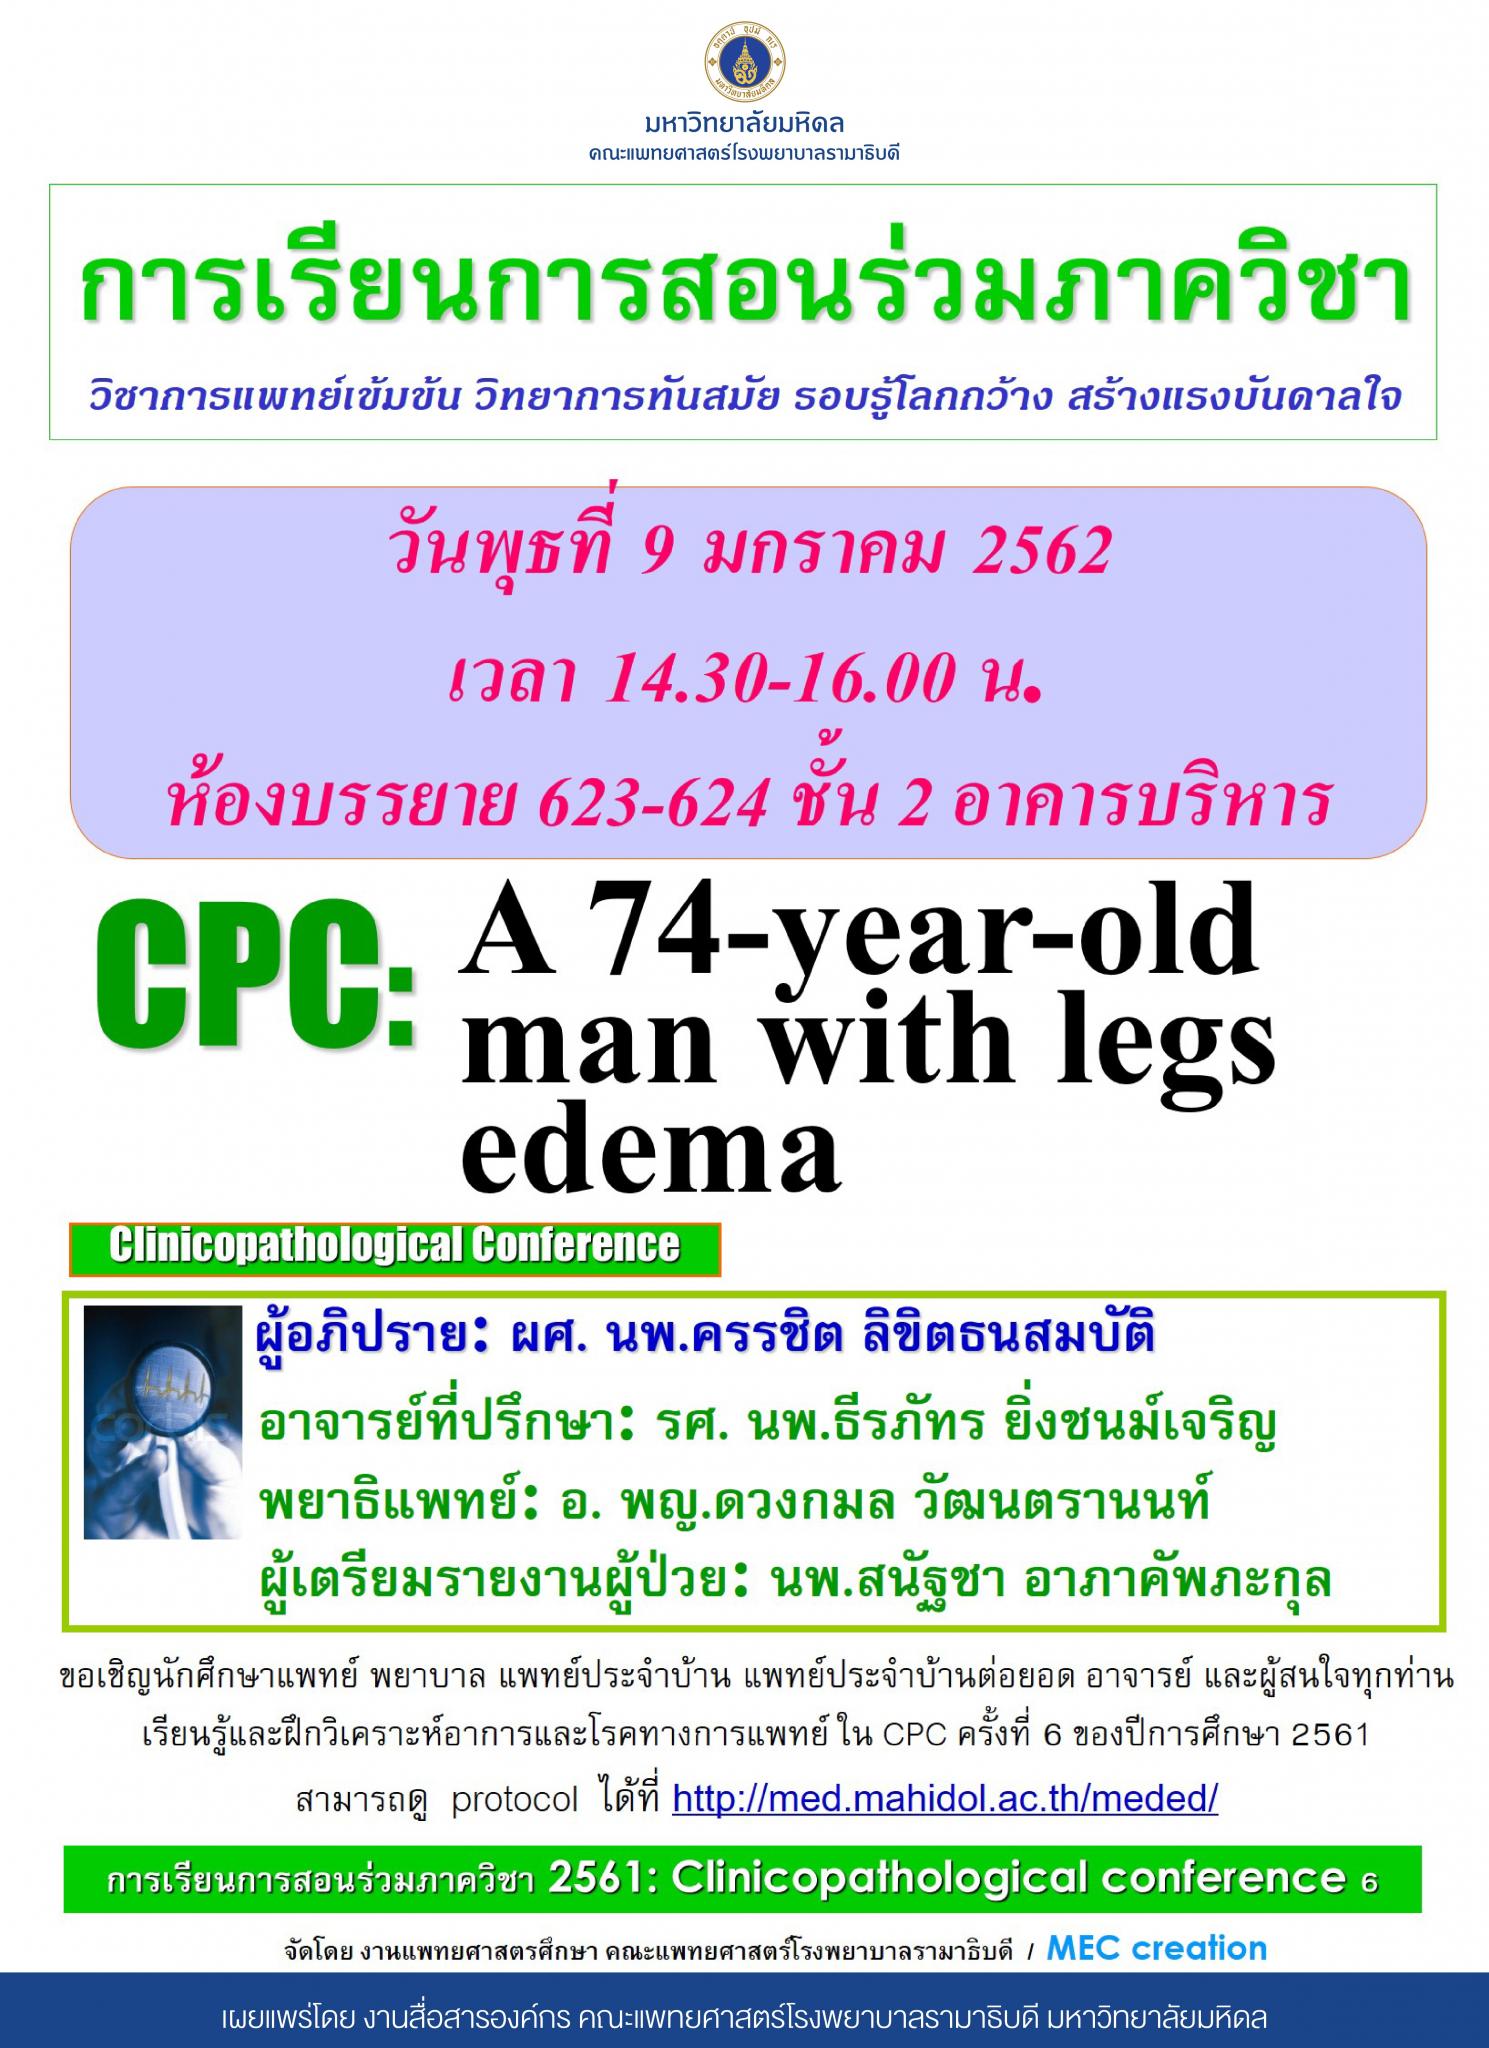 Clinicopathological Conference: A 74-year-old man with legs edema